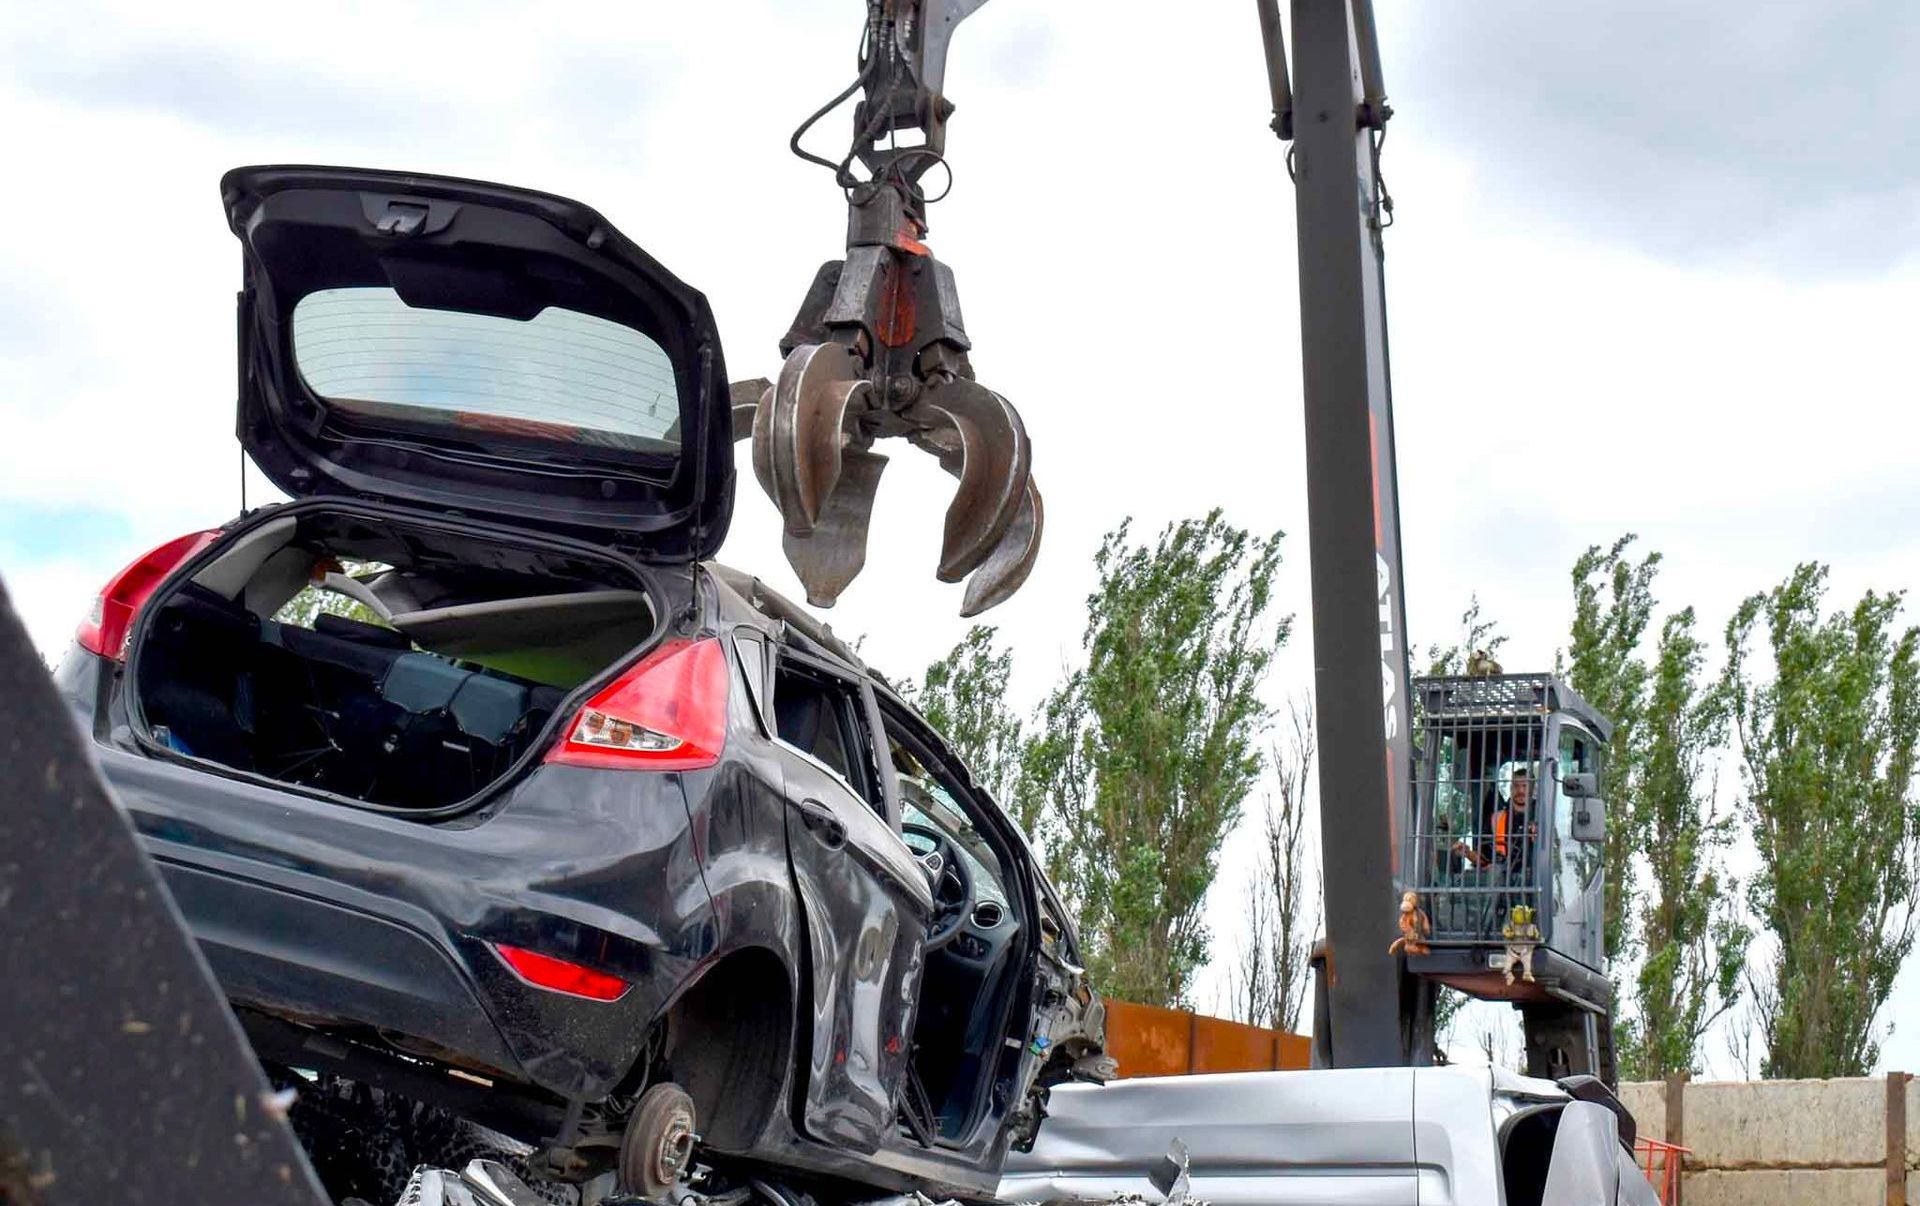 A car is being dismantled by a claw at Benfleet Scrap